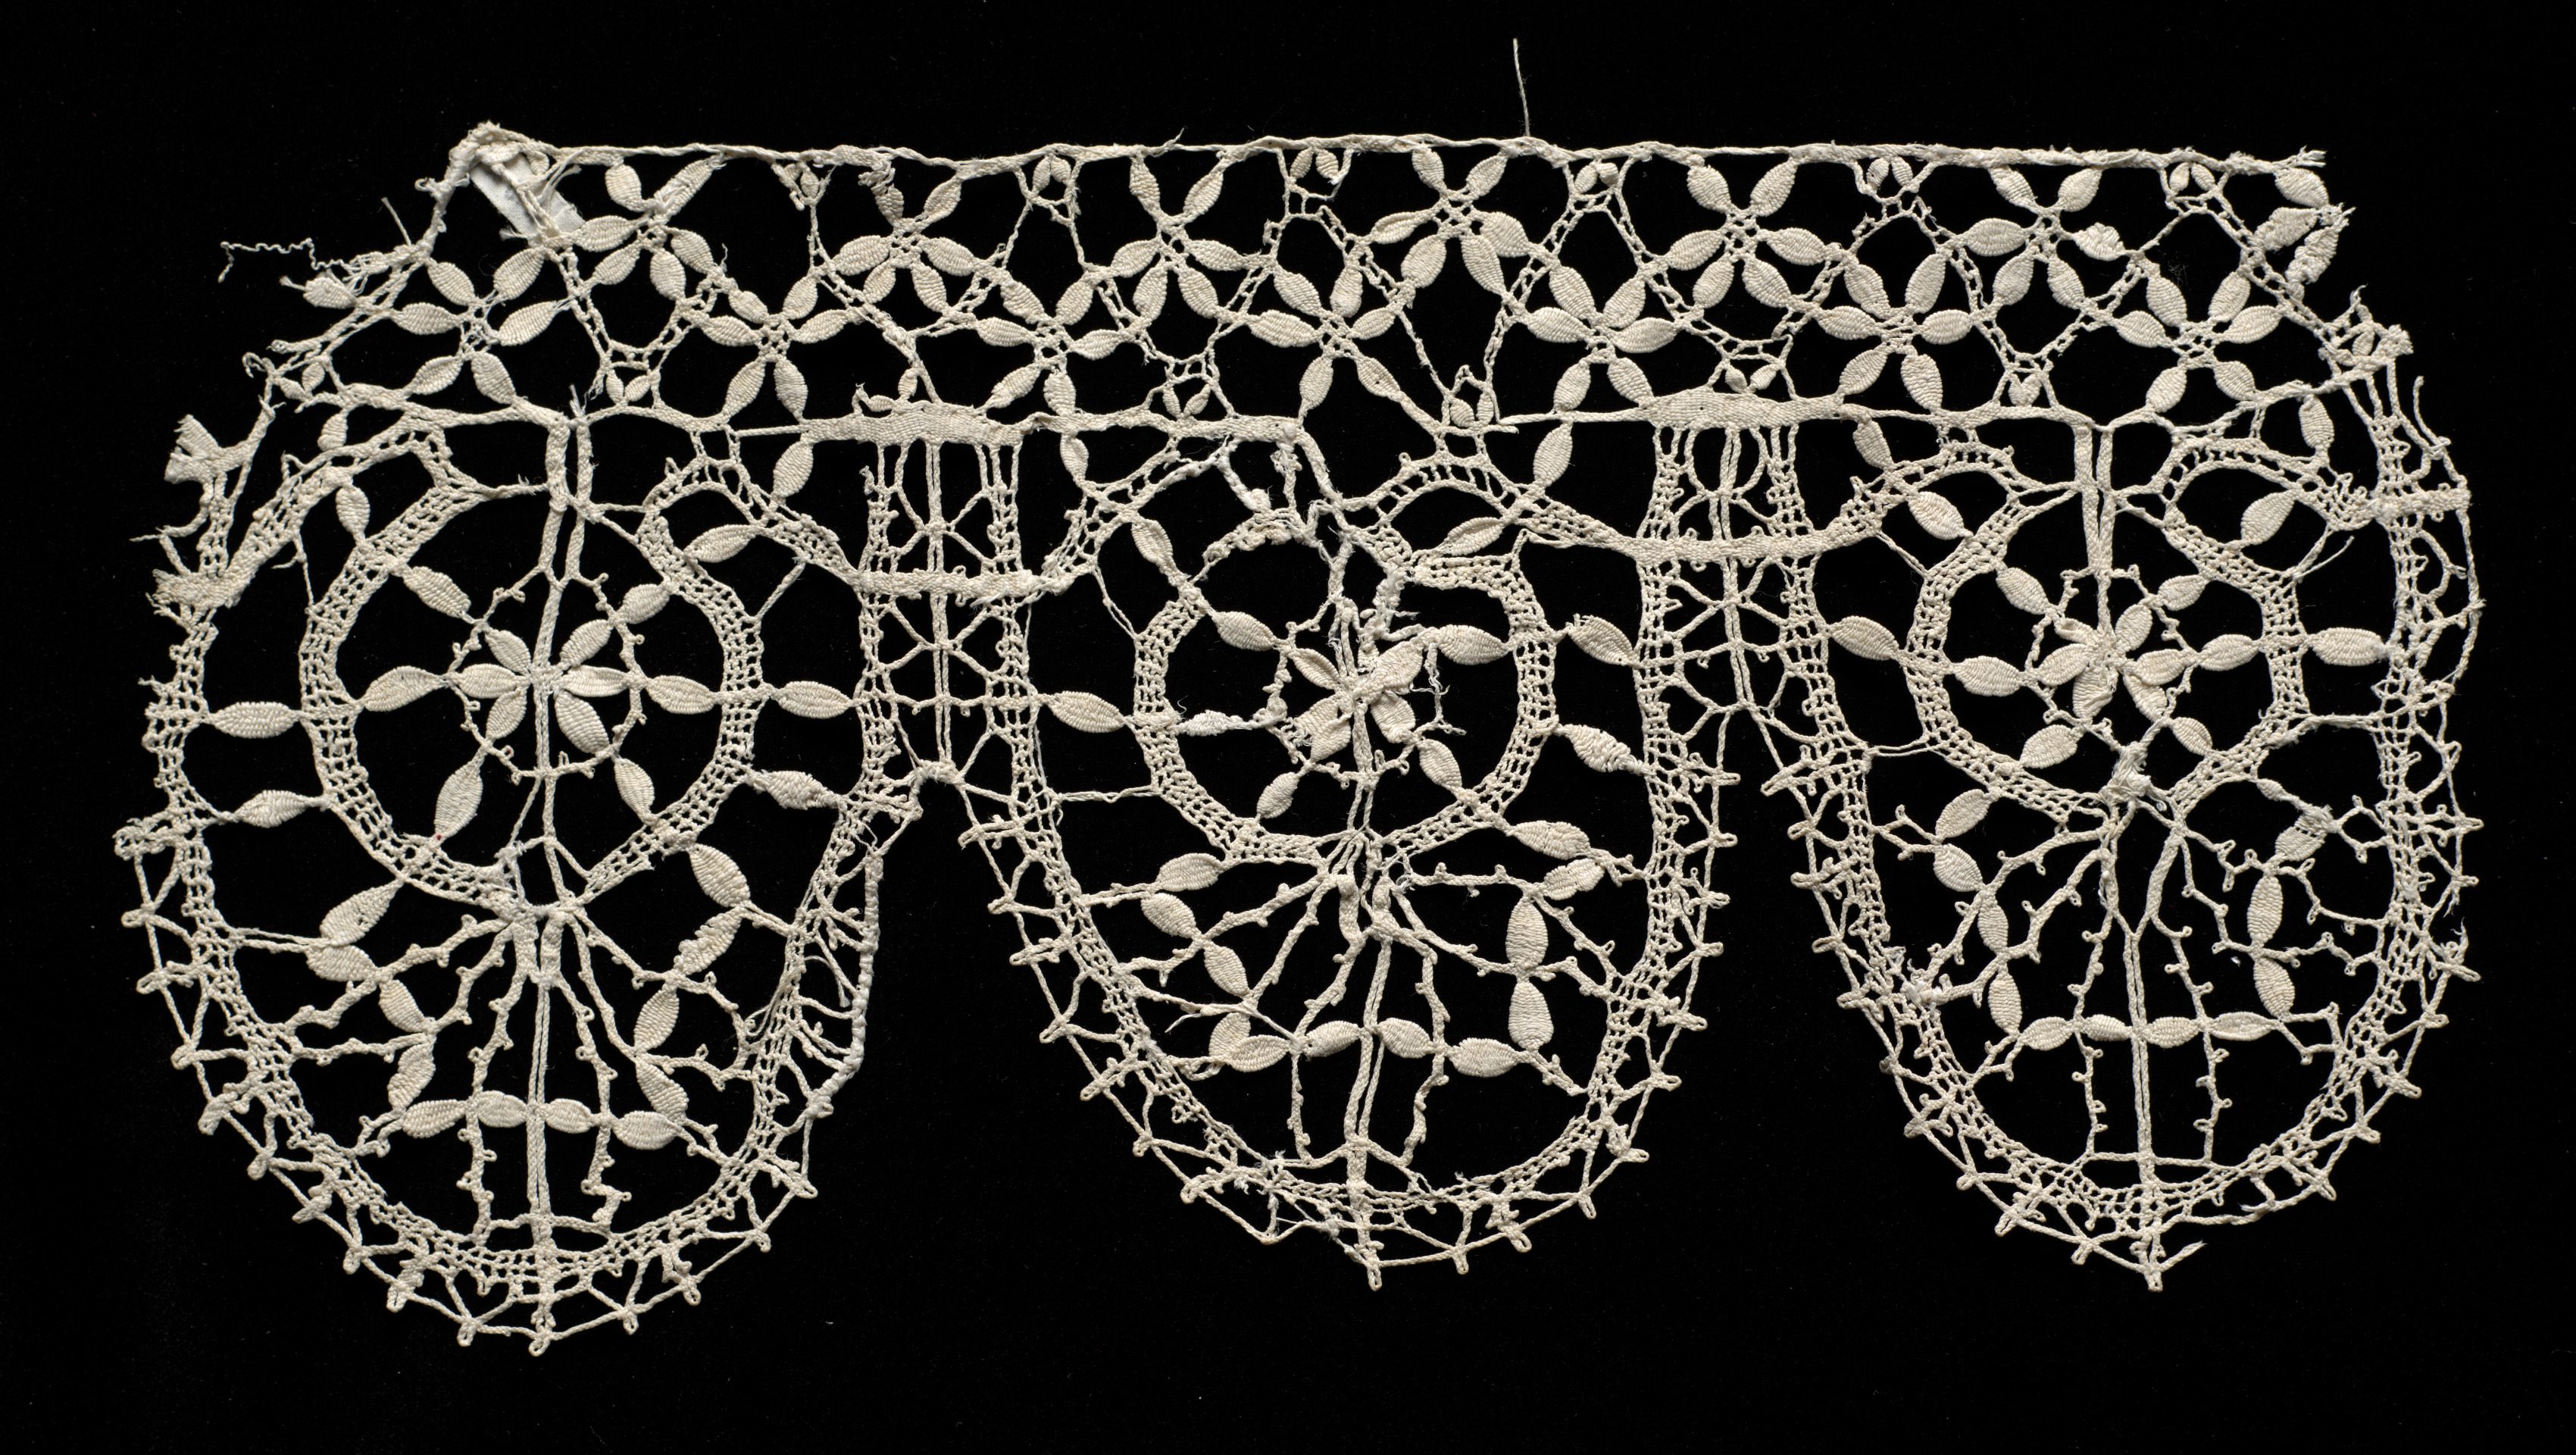 Bobbin Lace (Needlepoint Design) Insertion and Edging of Round Points